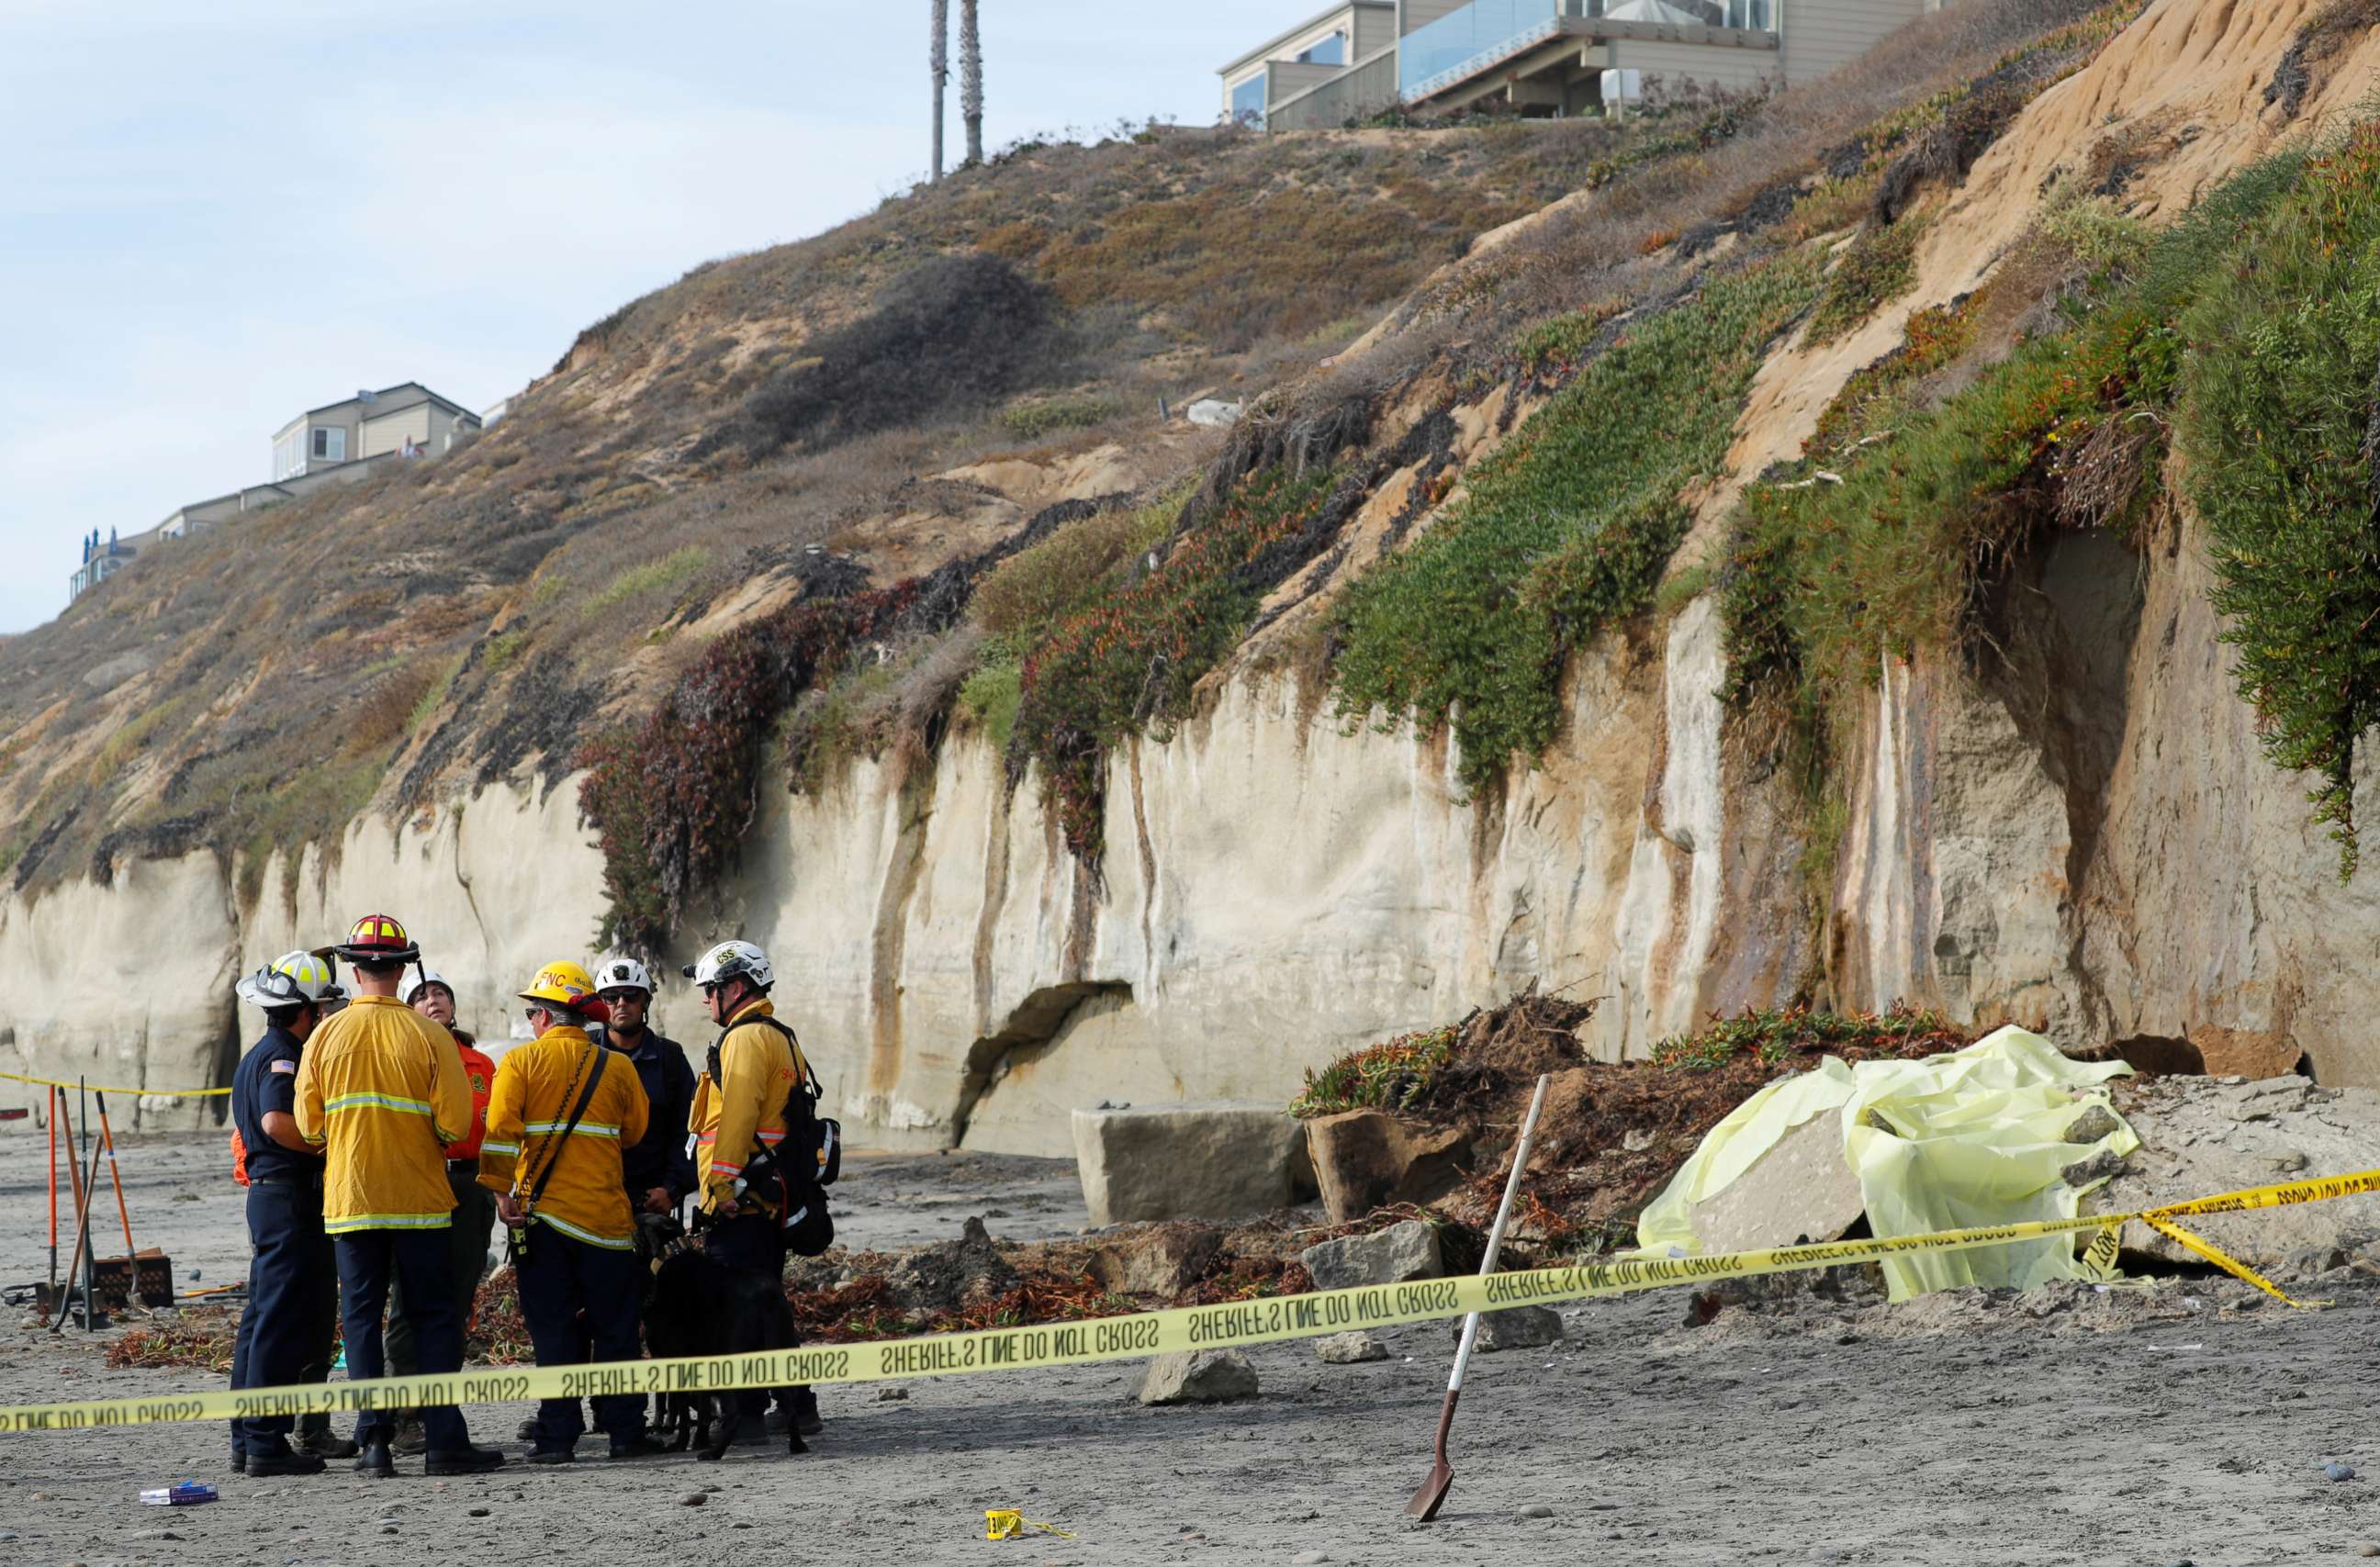 PHOTO: Emergency responders attend to a cliff collapse at a beach in Encinitas, Calif., on Friday, Aug. 2, 2019.